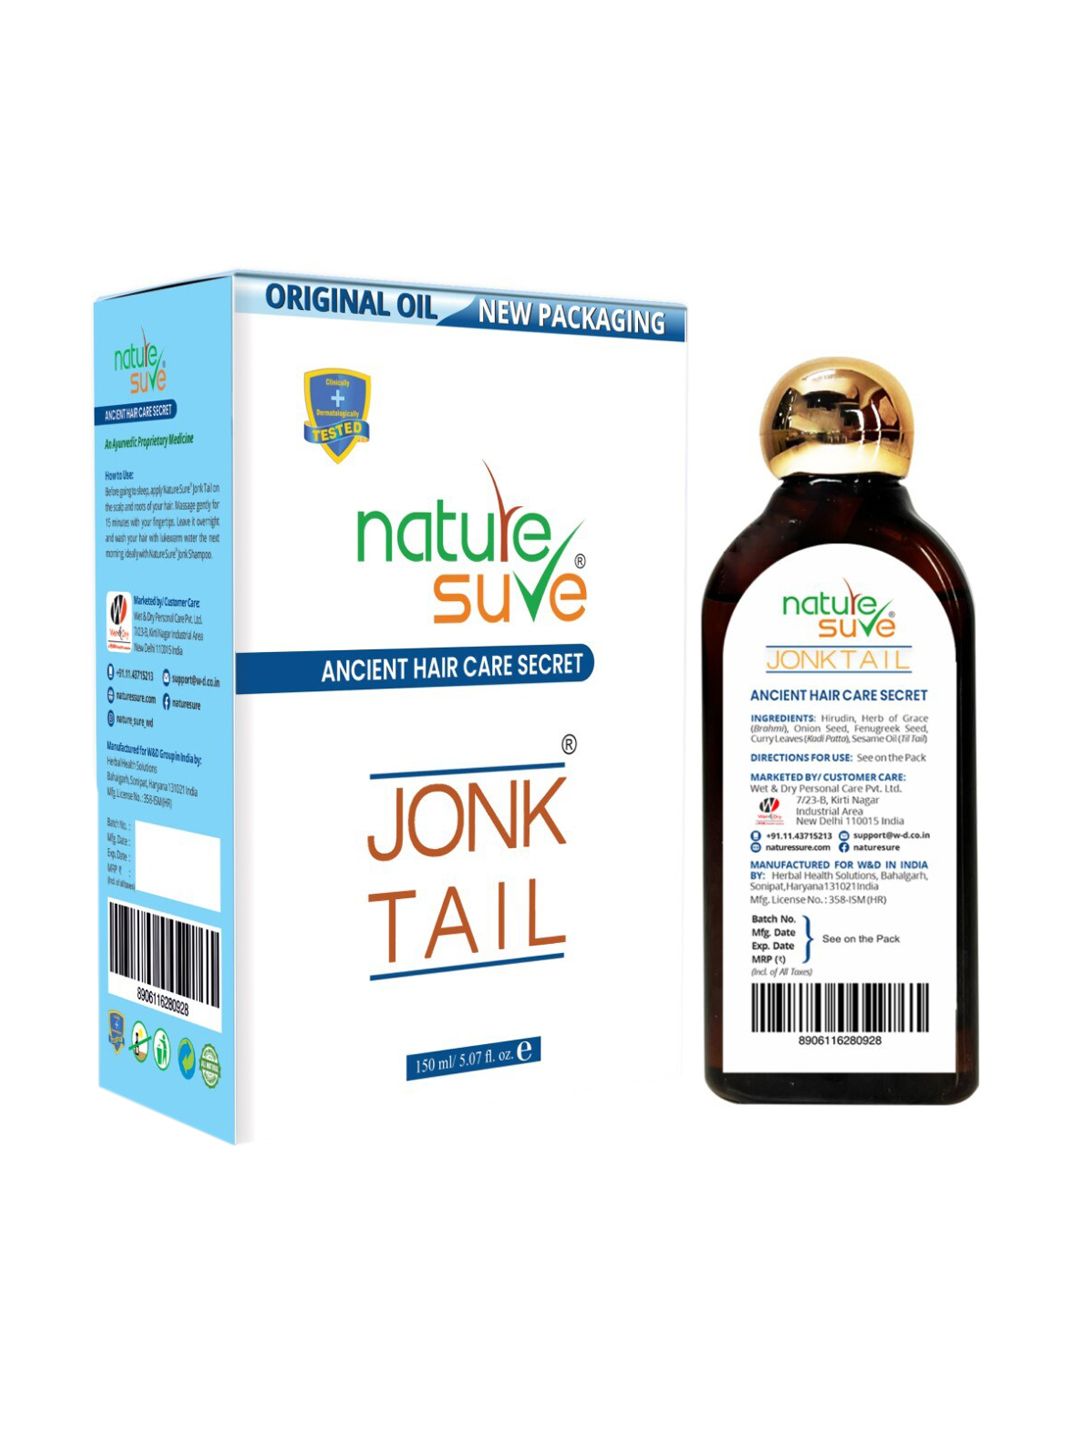 Nature Sure Jonk Tail Hair Oil 150 ml Price in India